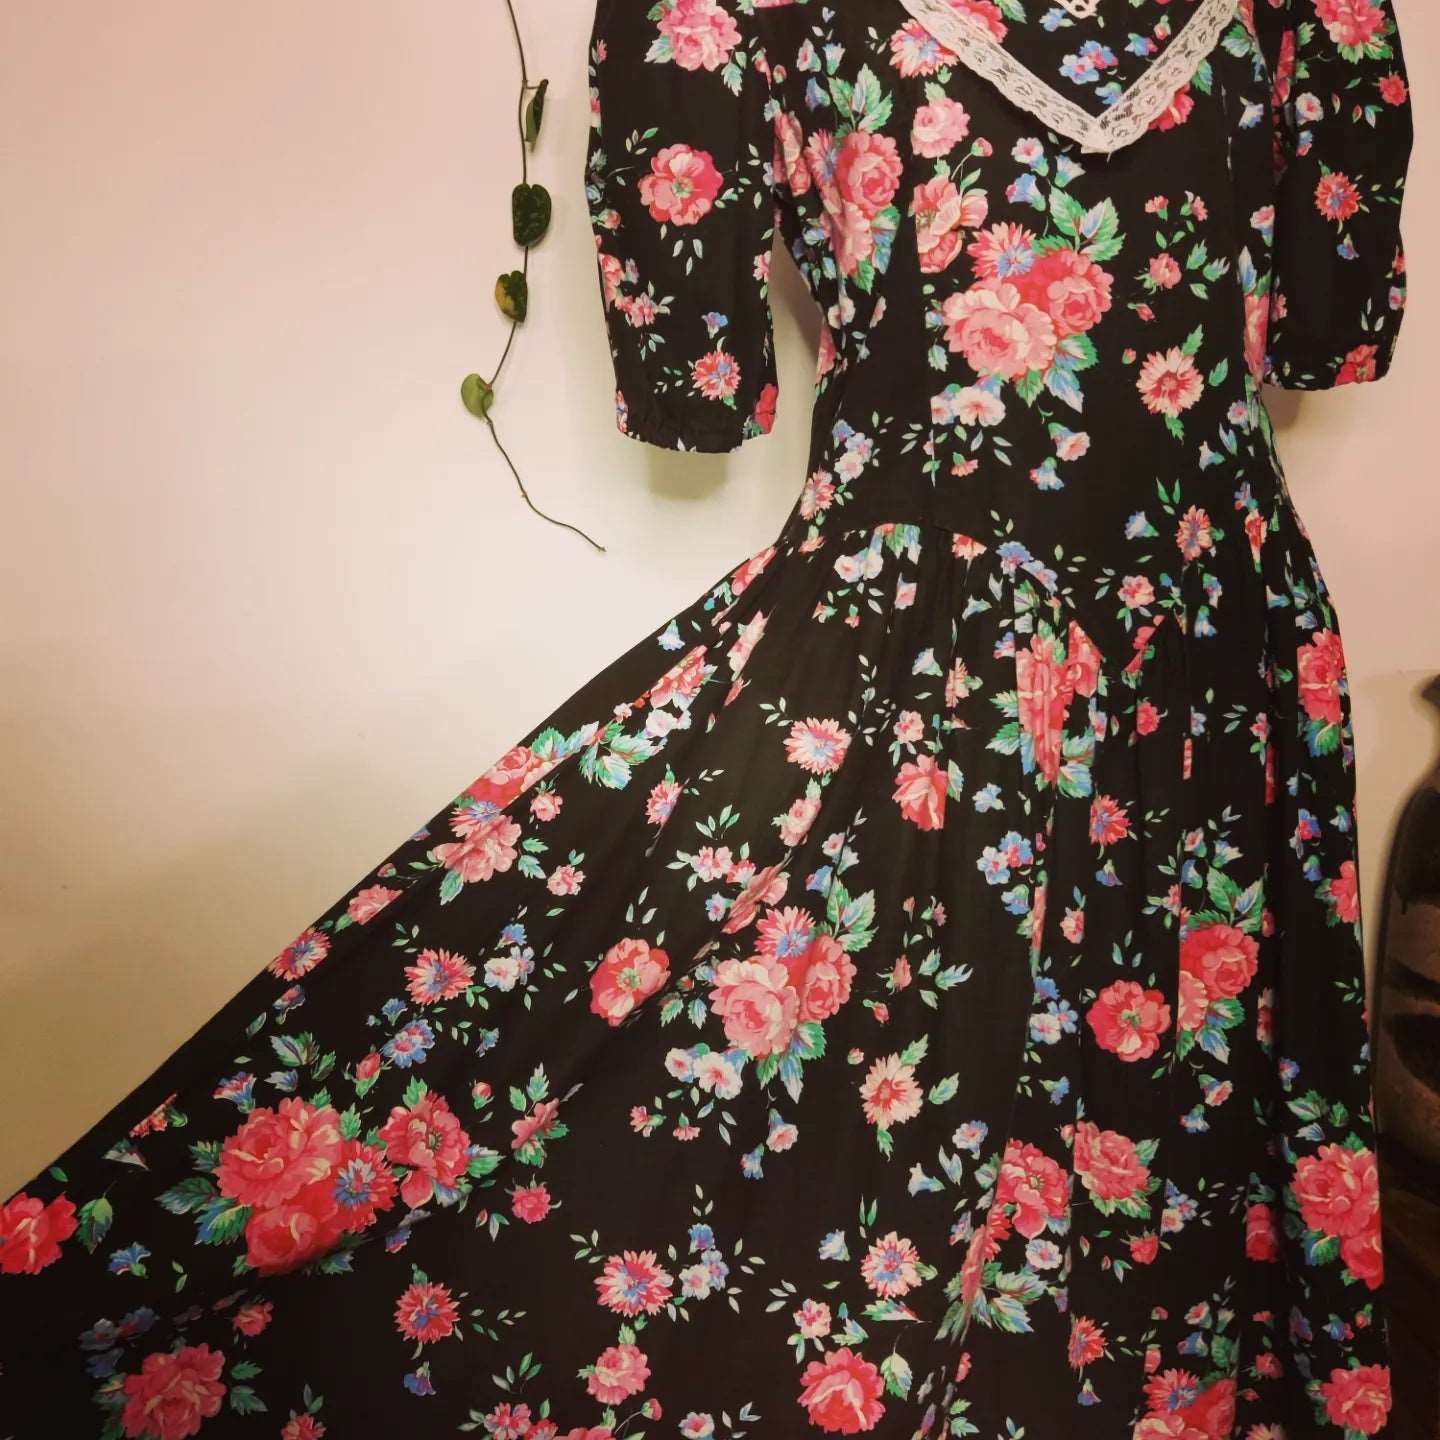 Black floral Laura Ashley style 80s midi dress with lace collar. Size 14